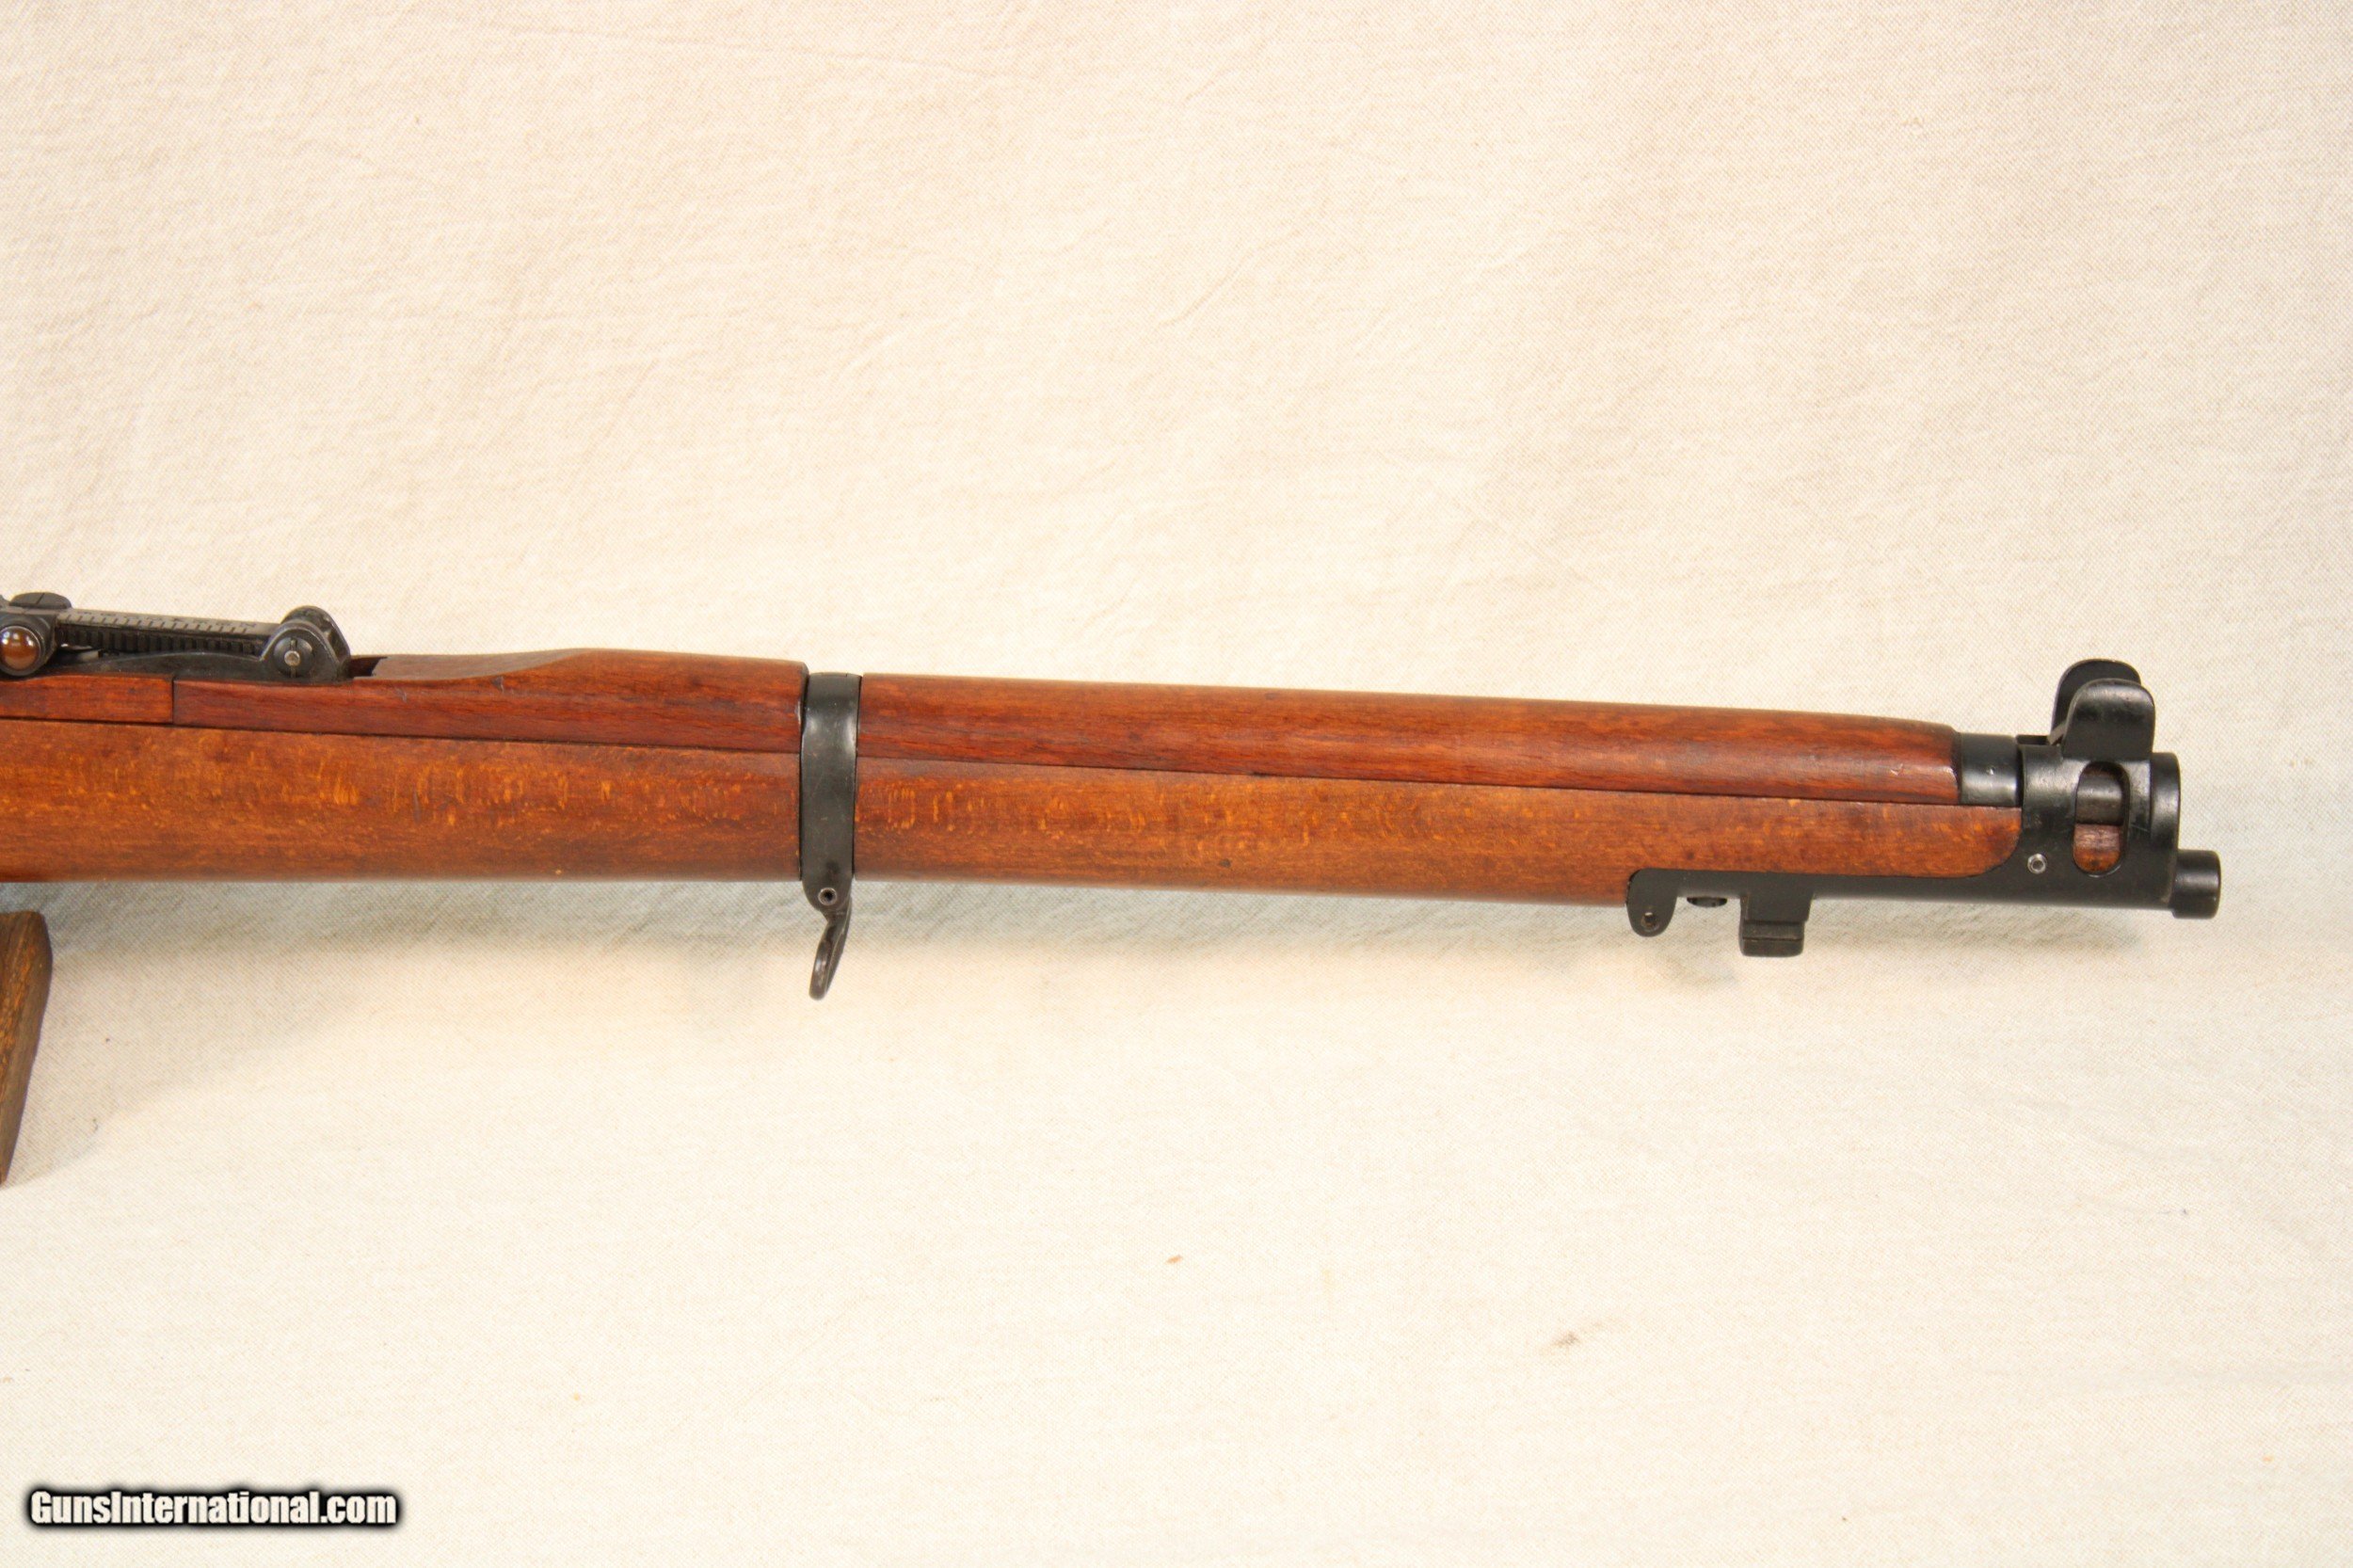 Used Lee Enfield Sht 22 IV* Trainer Bolt-Action 22 LR, 25 Barrel, Full  Military Wood, Dated 1916, Egyptian Markings, Matching Numbers, Good  Condition. Reliable Gun: Firearms, Ammunition & Outdoor Gear in Canada